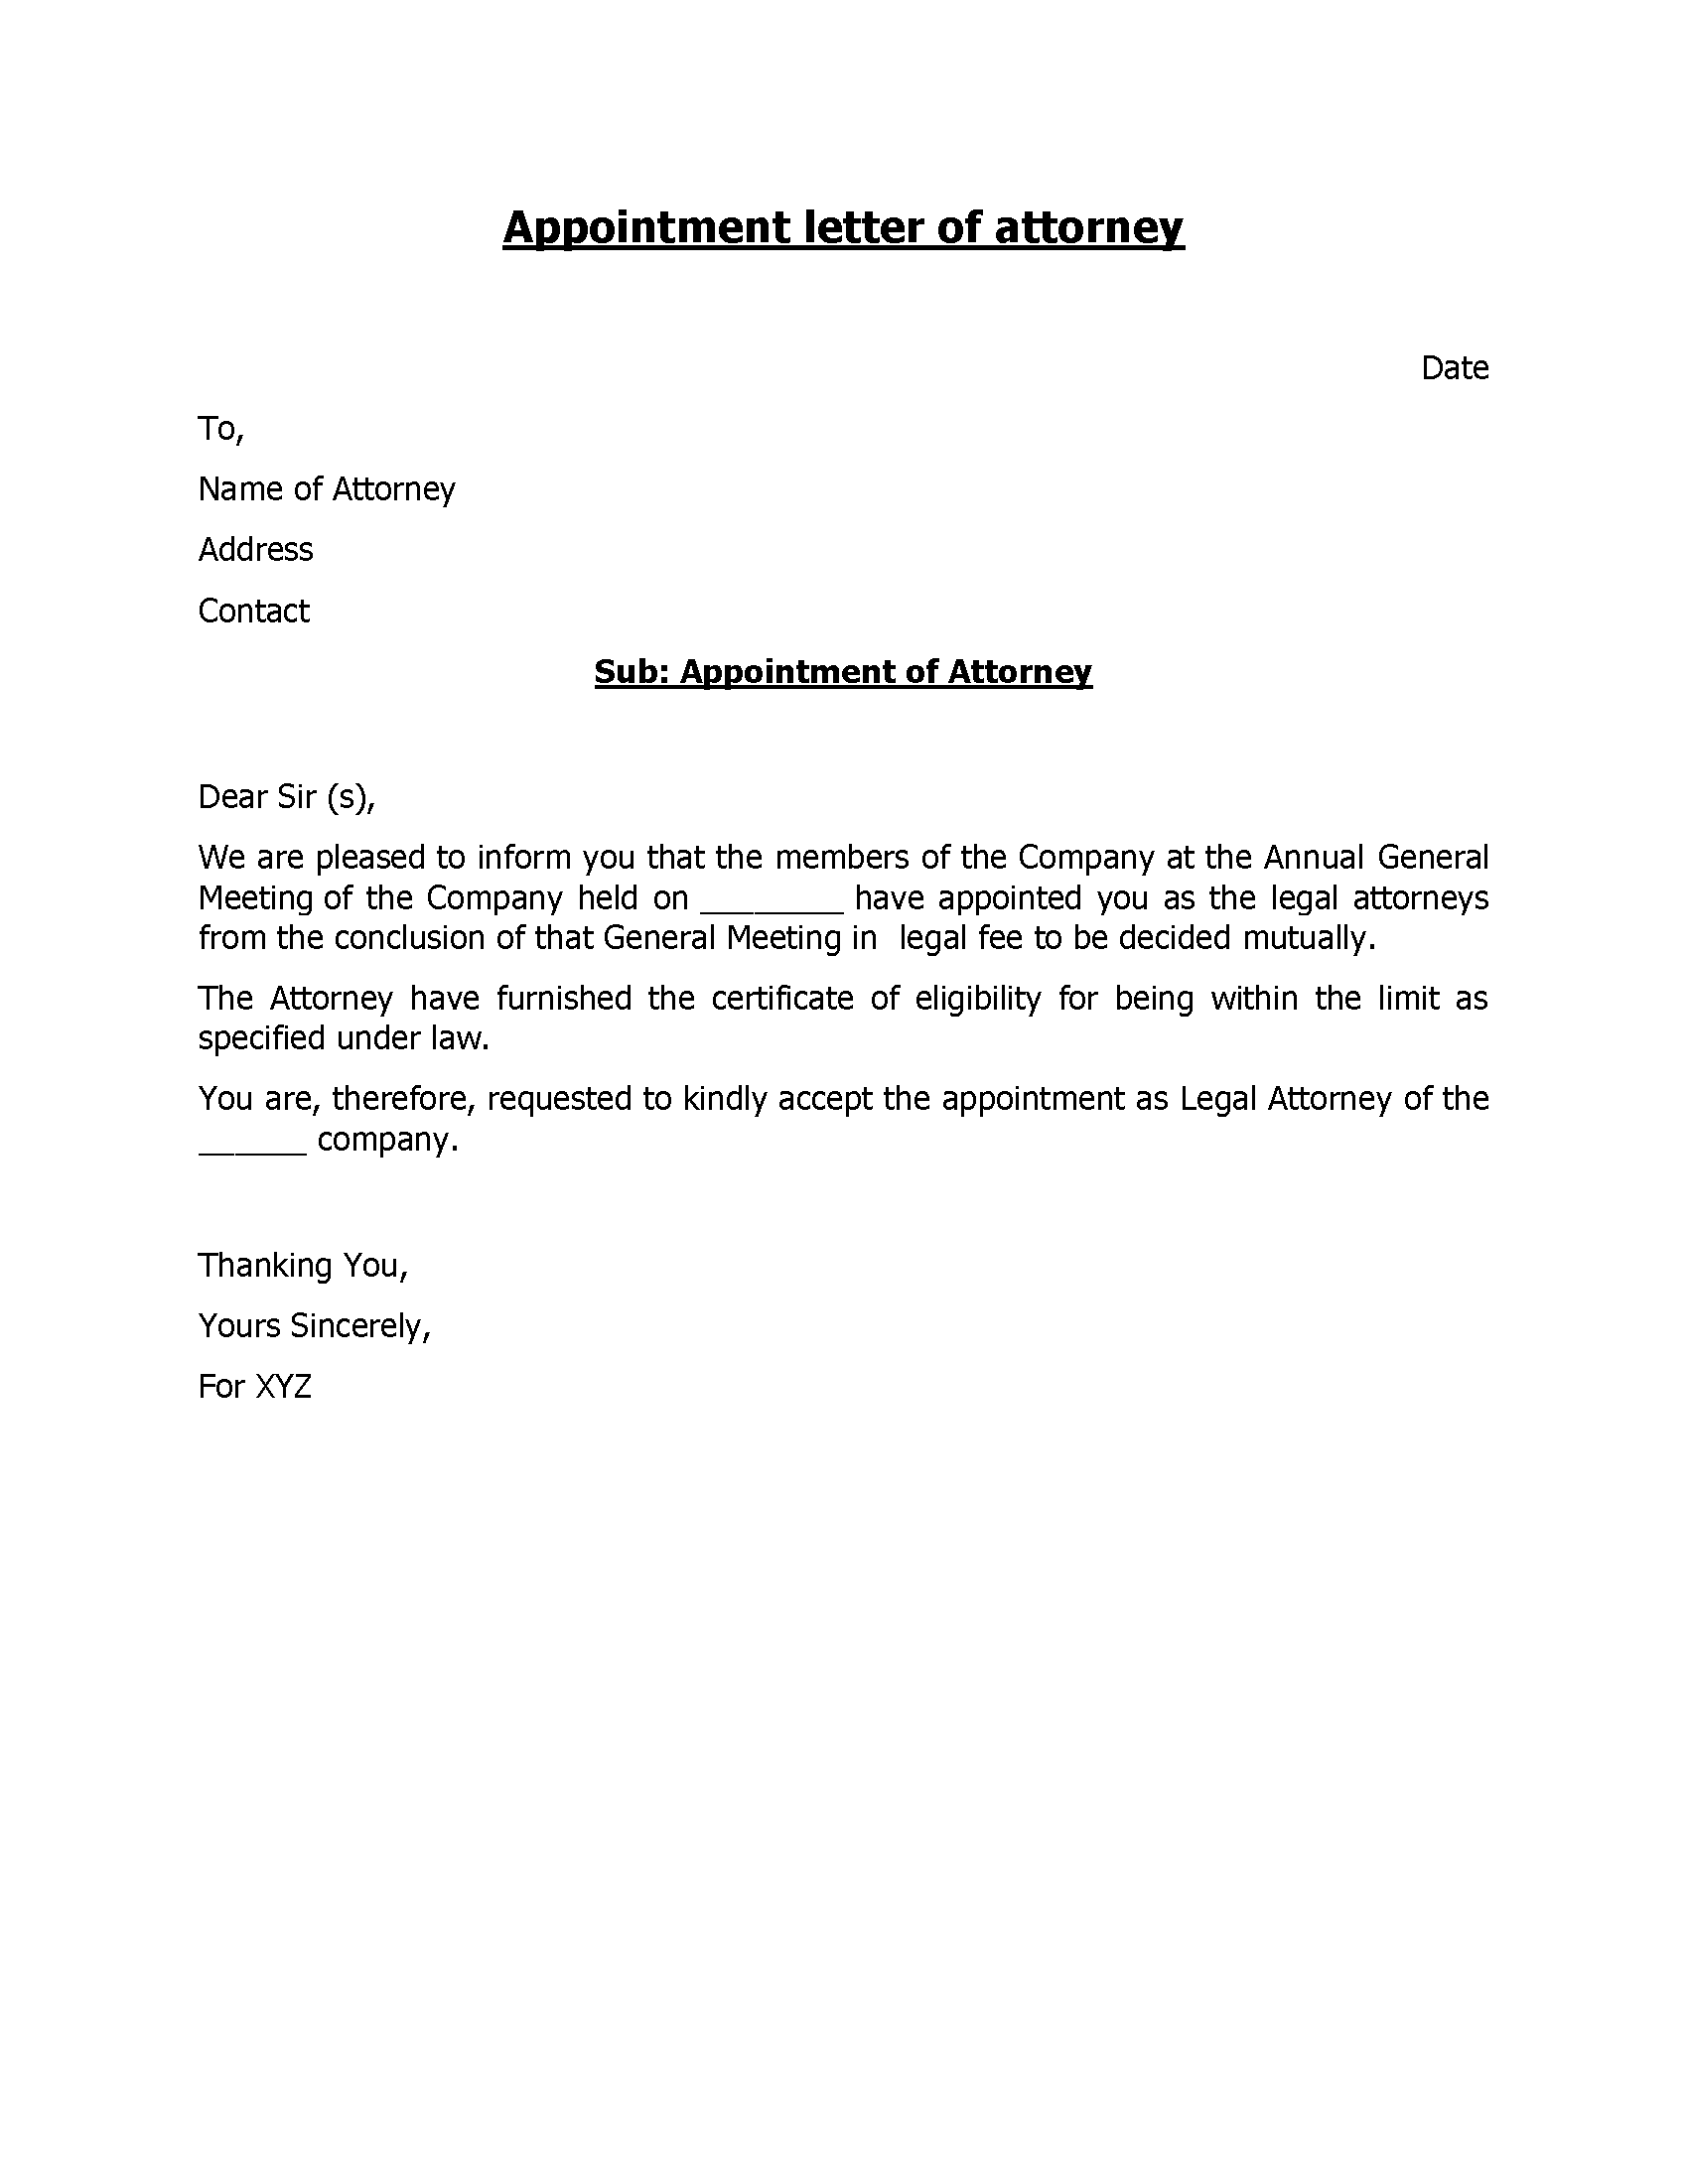 Appointment Letter Of Attorney